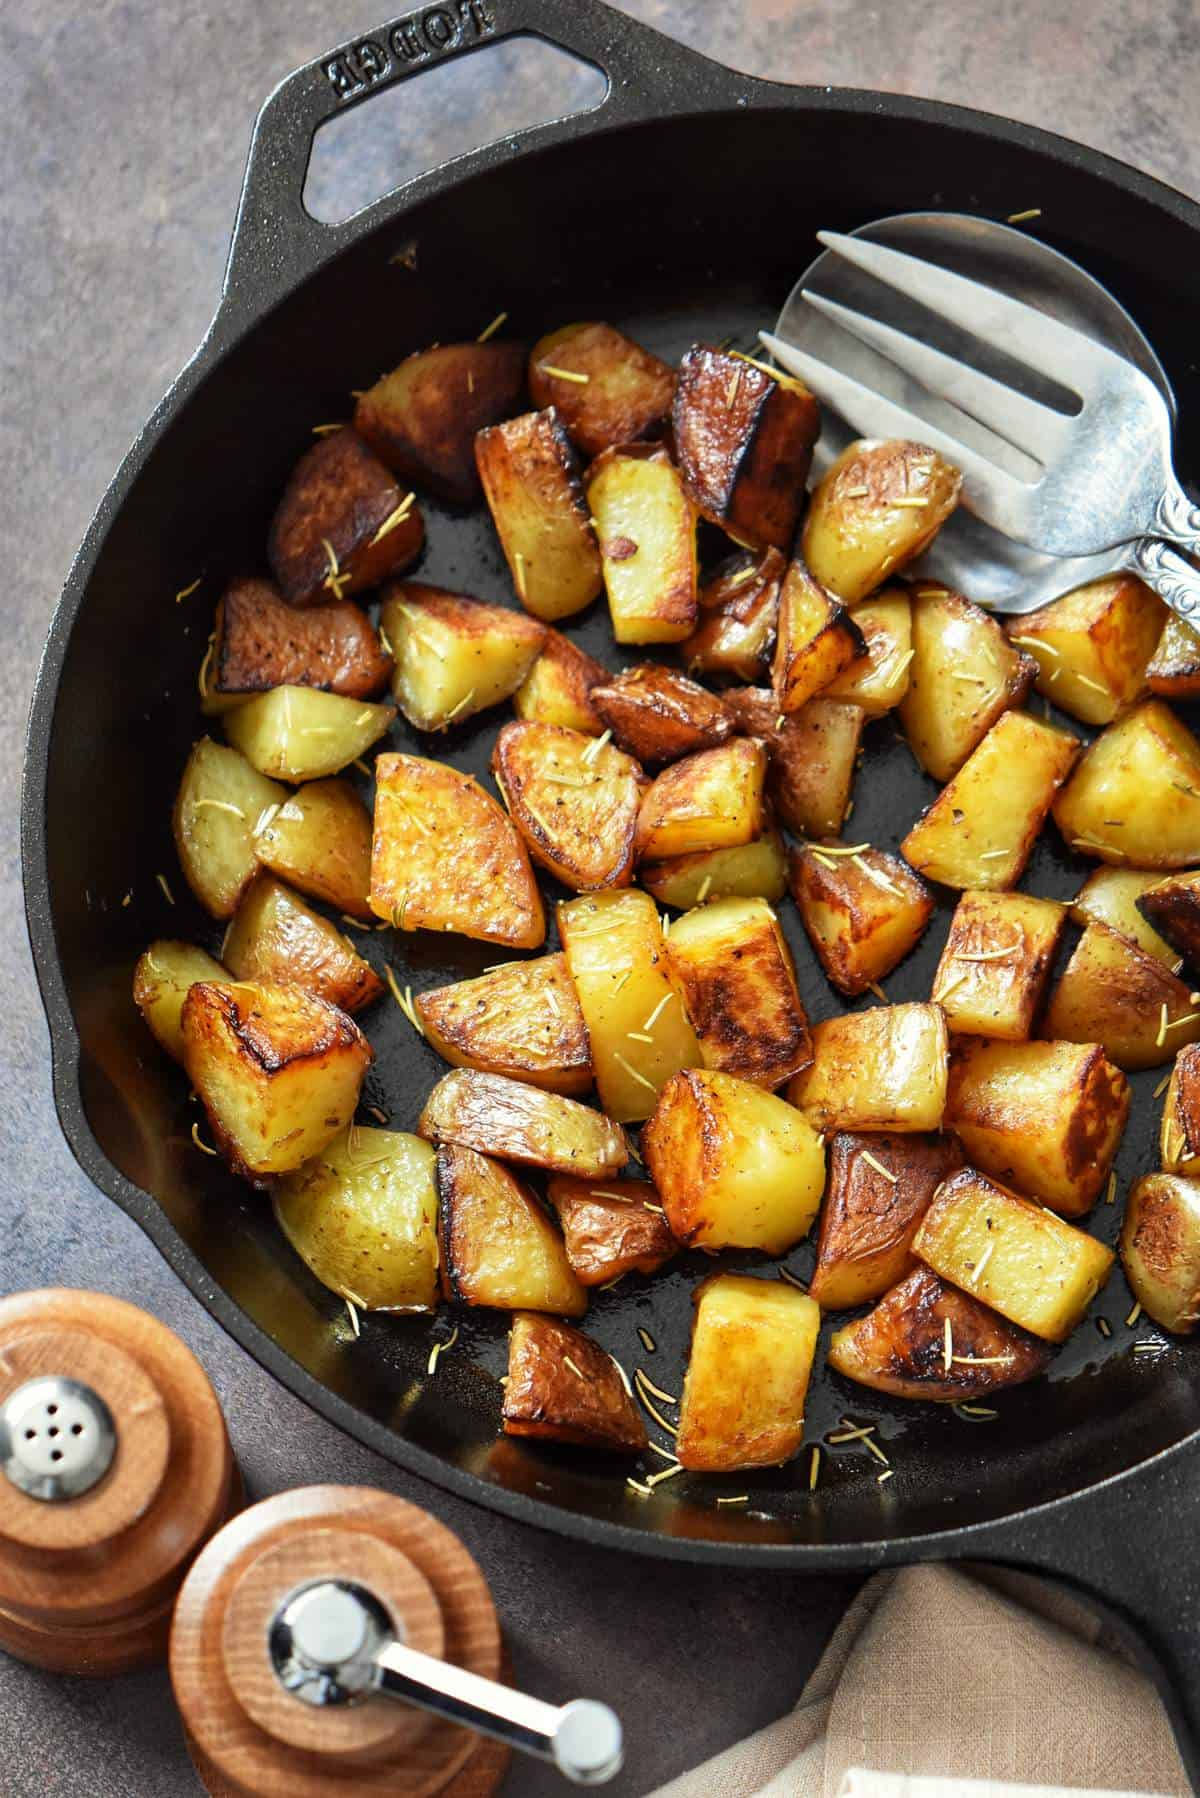 Crispy golden brown potatoes in a cast iron skillet.